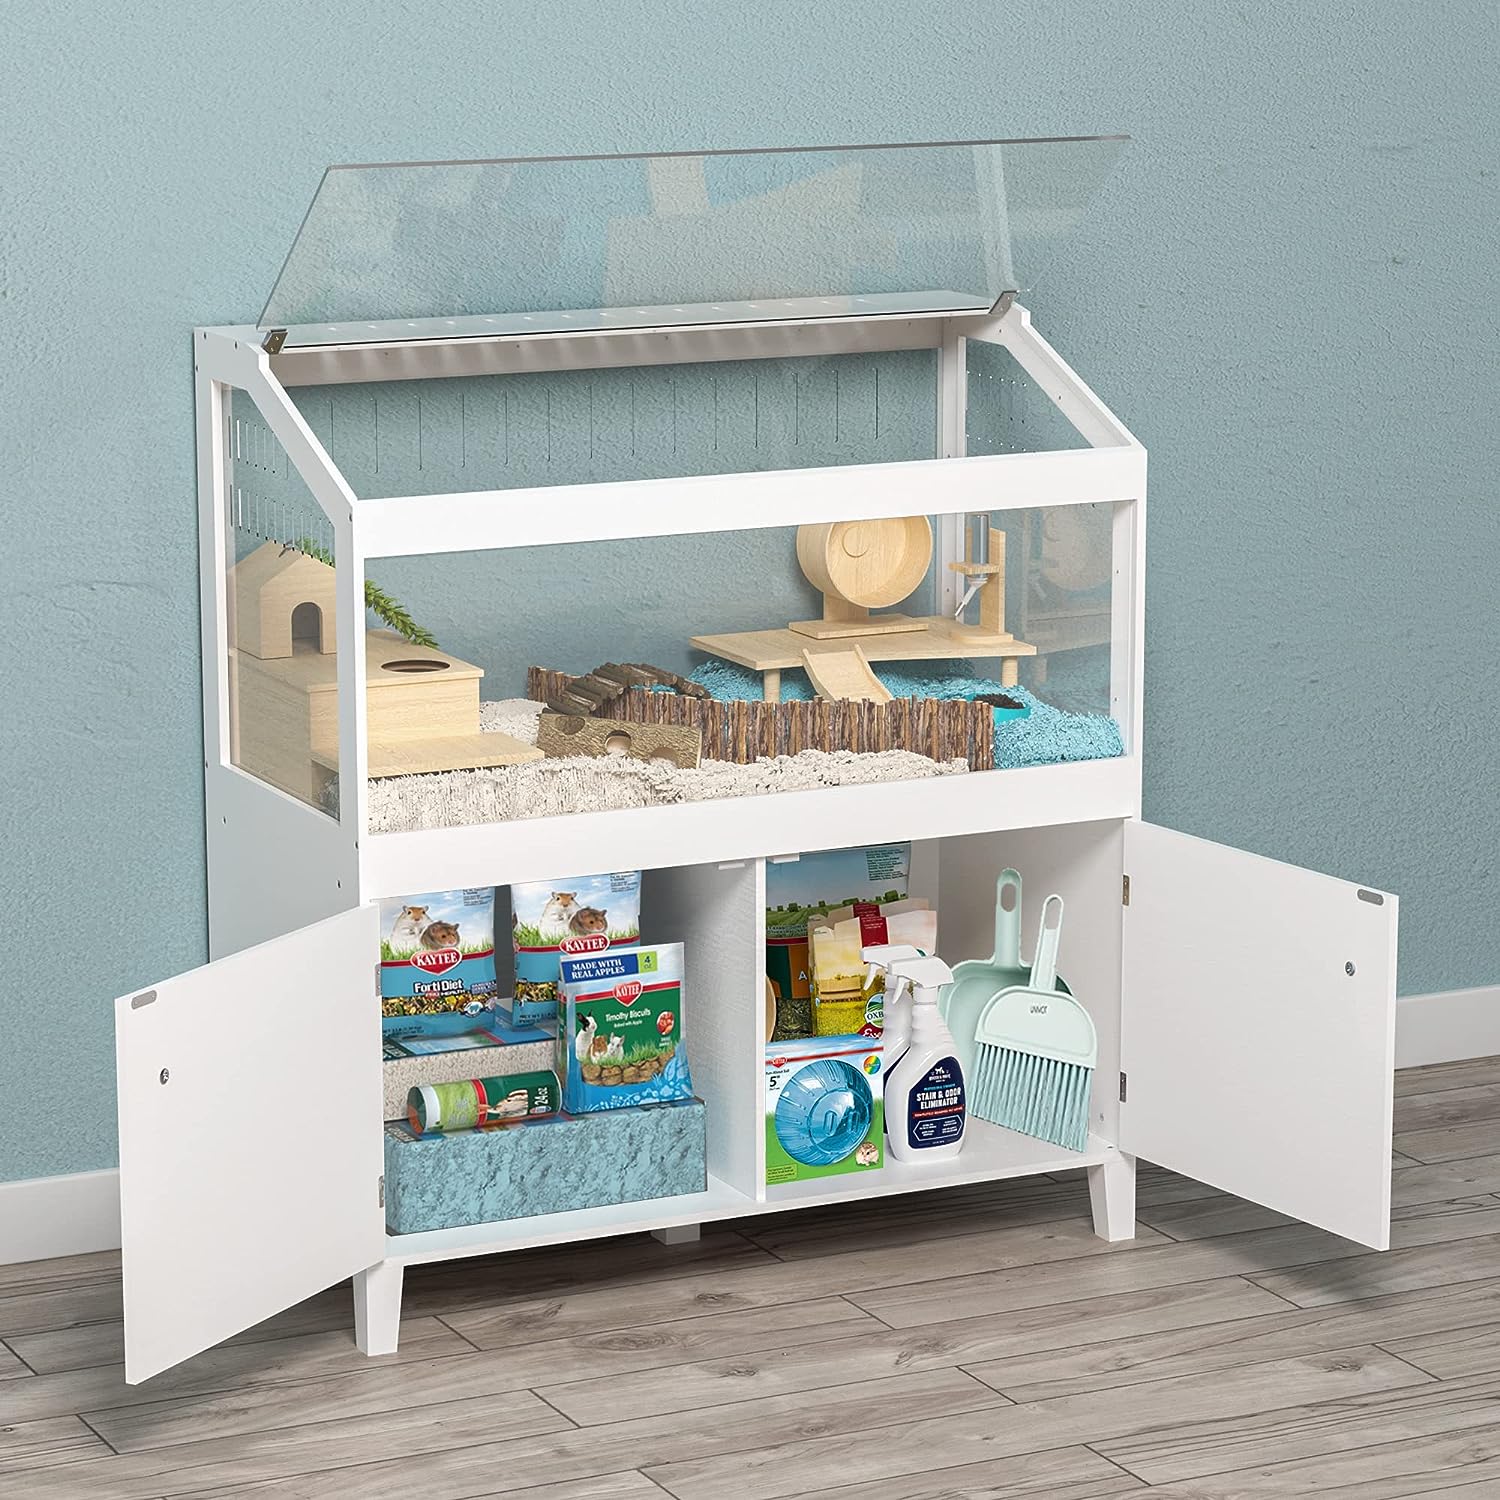 https://bigbigmart.com/wp-content/uploads/2023/09/GDLF-Hamster-Cage-with-Storage-Cabinet-Small-Animal-Cage-Easy-View-Acrylic-Panels-Large-Habitat-for-Hedgehog-Gerbil-Rat-.jpg